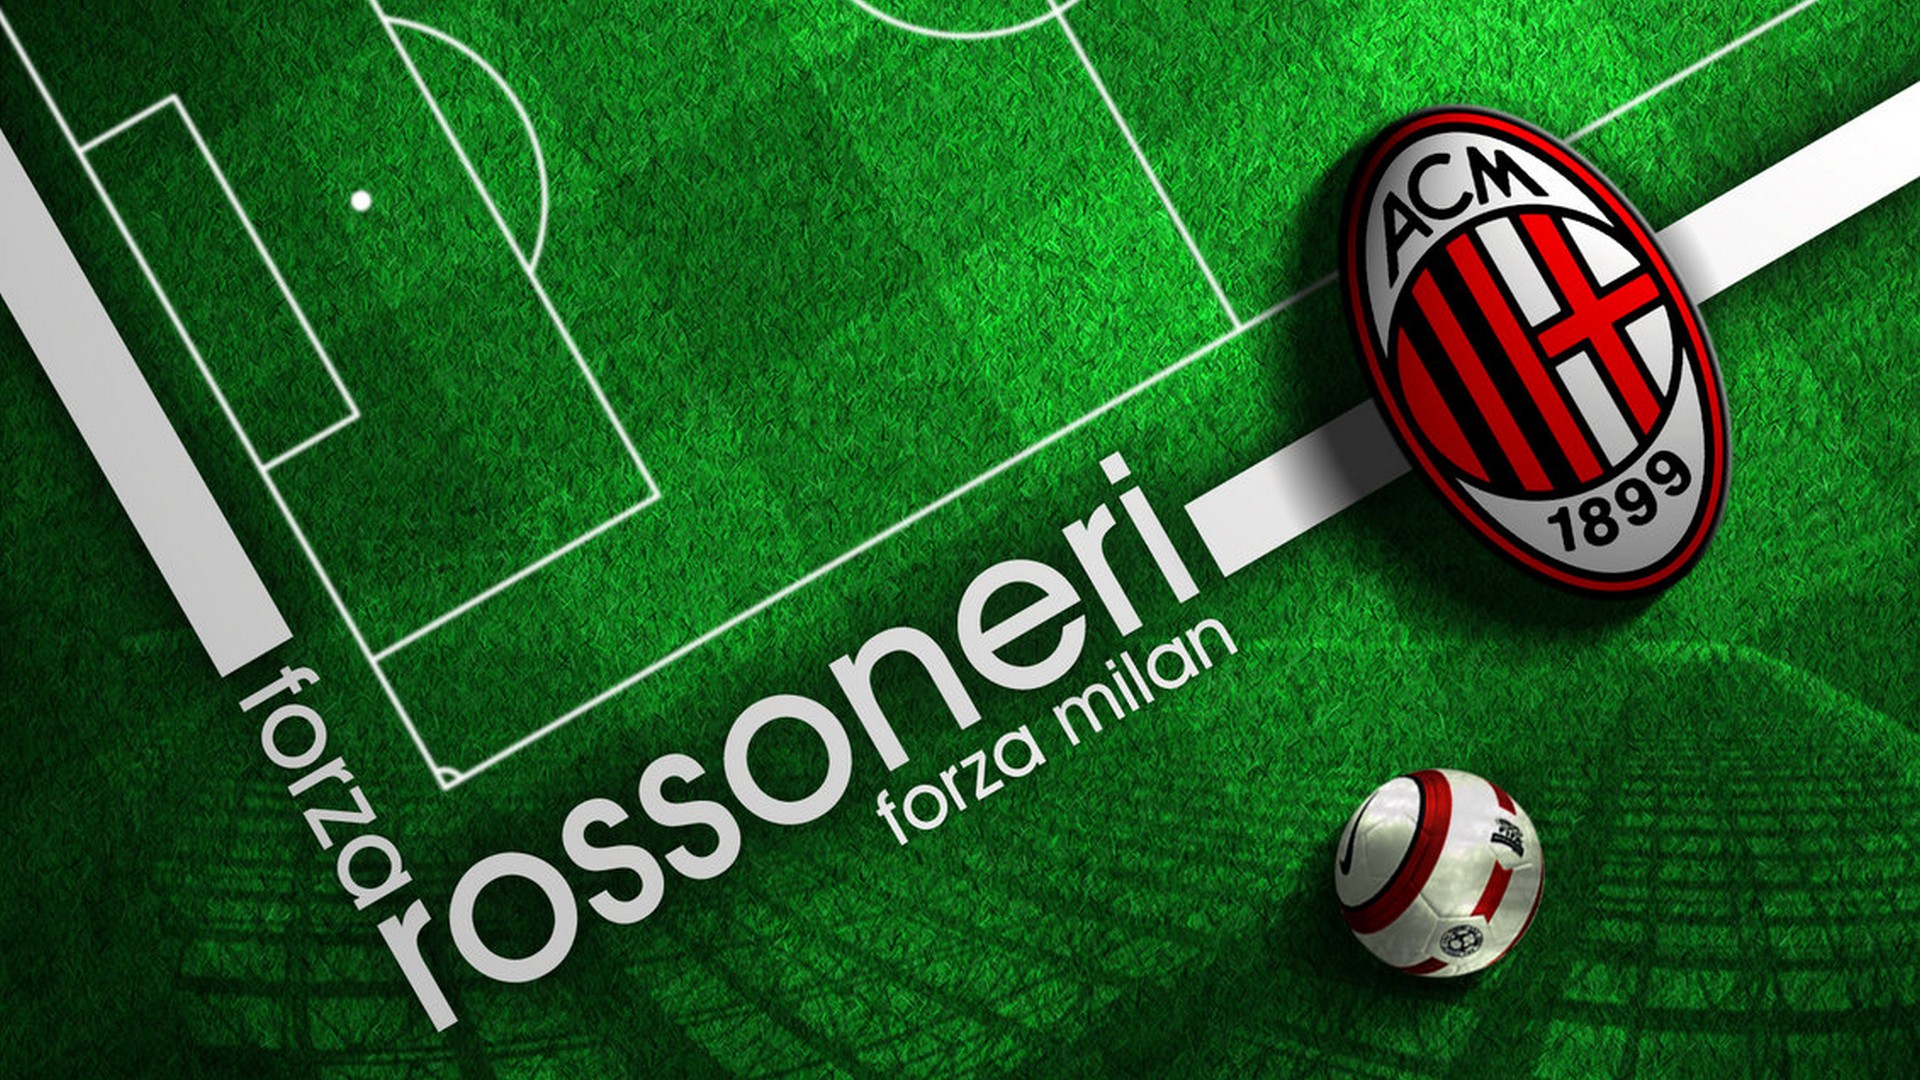 HD Desktop Wallpaper Milan With high-resolution 1920X1080 pixel. You can use this wallpaper for your Desktop Computers, Mac Screensavers, Windows Backgrounds, iPhone Wallpapers, Tablet or Android Lock screen and another Mobile device